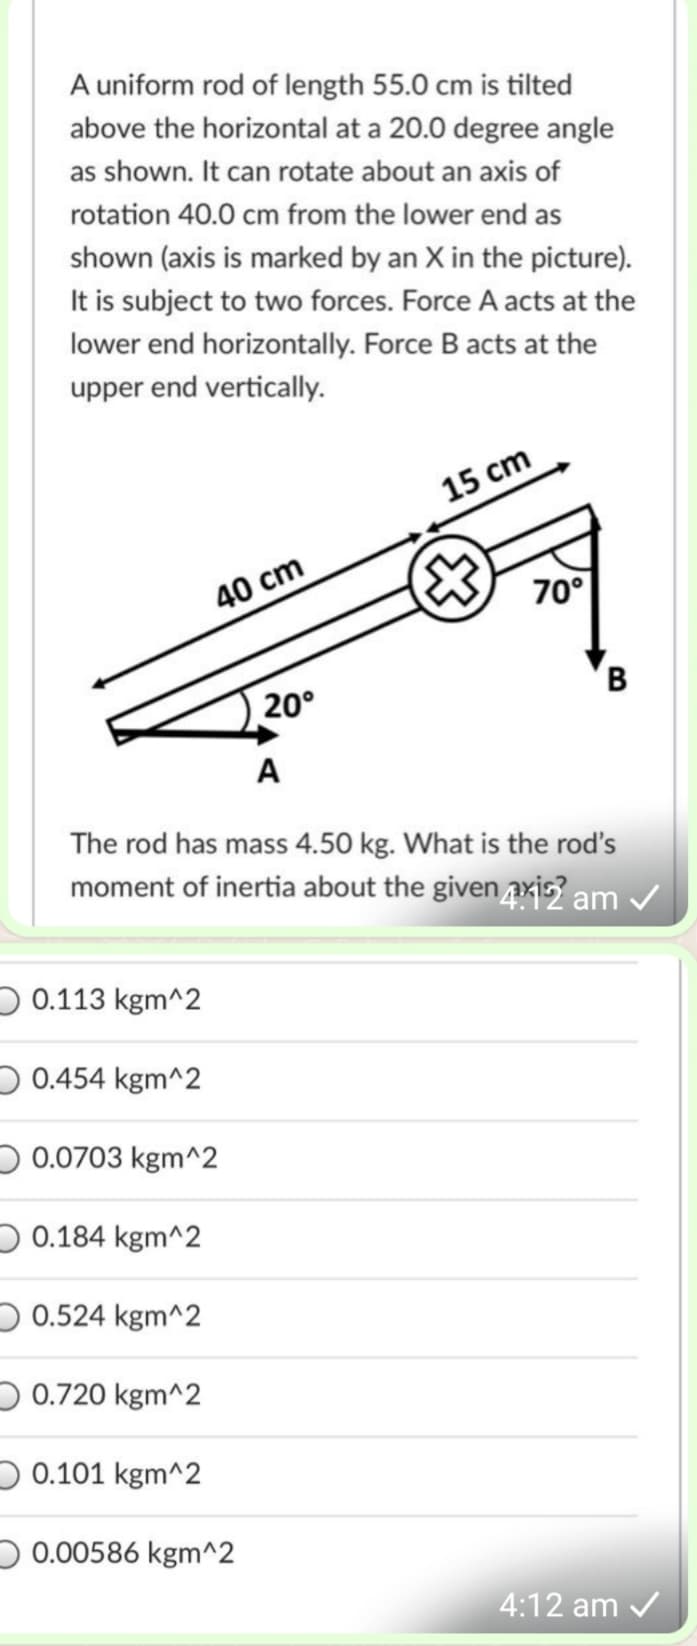 A uniform rod of length 55.0 cm is tilted
above the horizontal at a 20.0 degree angle
as shown. It can rotate about an axis of
rotation 40.0 cm from the lower end as
shown (axis is marked by an X in the picture).
It is subject to two forces. Force A acts at the
lower end horizontally. Force B acts at the
upper end vertically.
15 cm
40 cm
70°
20°
A
The rod has mass 4.50 kg. What is the rod's
moment of inertia about the given axis? am /
D 0.113 kgm^2
D 0.454 kgm^2
D 0.0703 kgm^2
O 0.184 kgm^2
O 0.524 kgm^2
D 0.720 kgm^2
O 0.101 kgm^2
) 0.00586 kgm^2
4:12 am /
